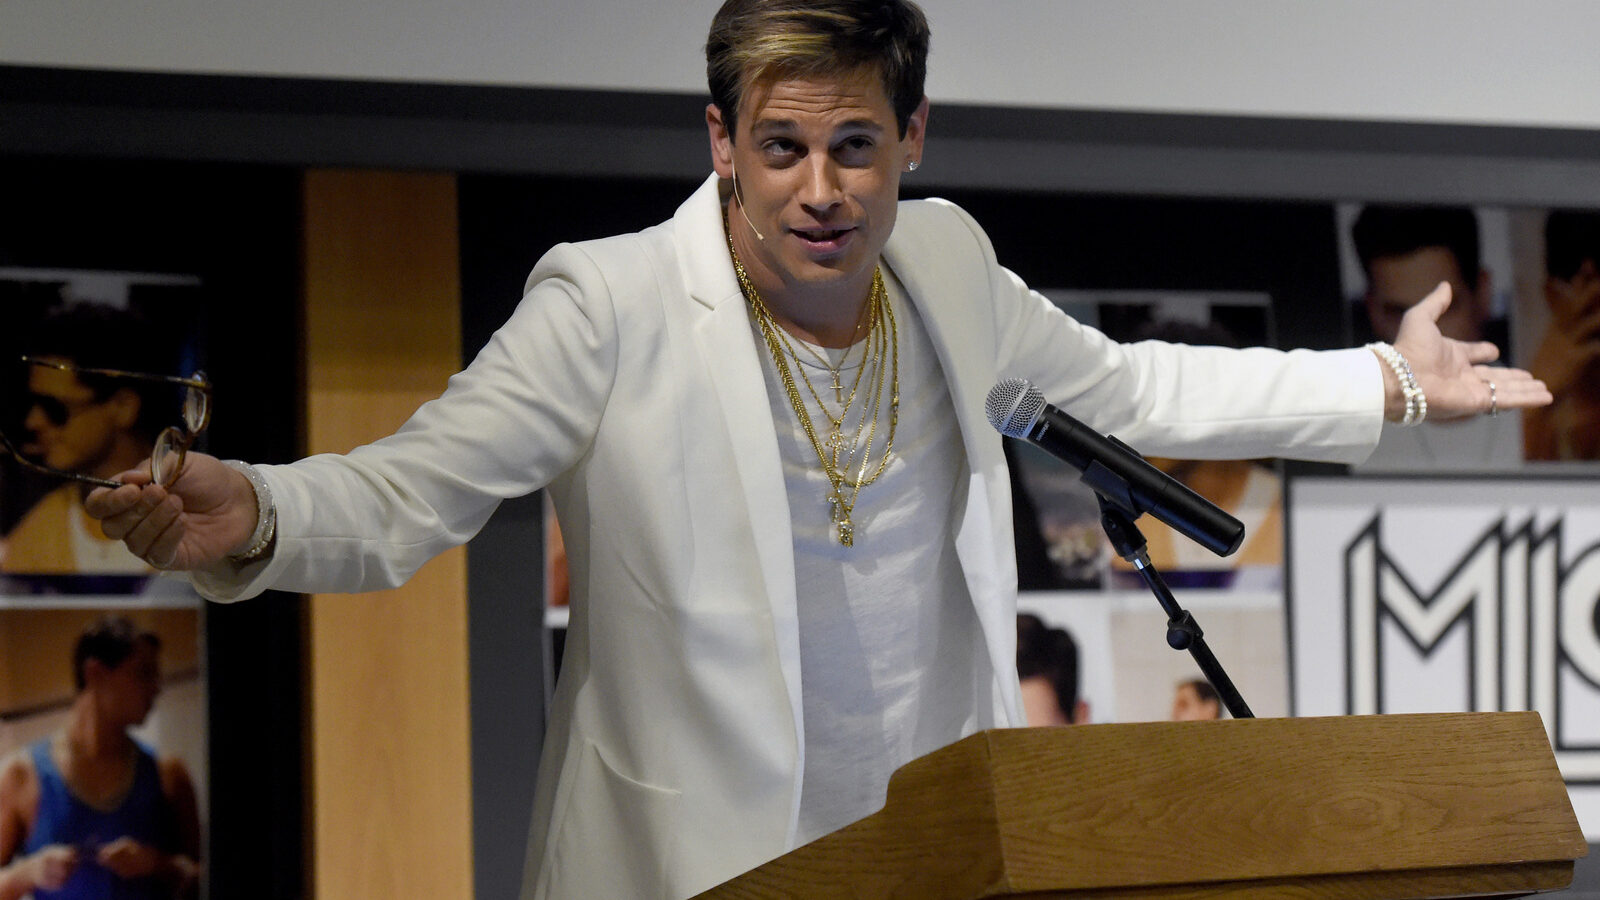 Milo Yiannopoulos speaks on campus in the Mathematics building at the University of Colorado in Boulder, Colo. Right-wing provocateur Yiannopoulos was trying to clarify past comments on relationships between boys and older men after a conservative site posted a collection of edited video clips that set social media abuzz. After the polarizing Breitbart News editor was invited this weekend to speak at the annual Conservative Political Action Conference sparked a backlash, the Reagan Battalion tweeted video clips Sunday, Feb. 19, 2017 in which Yiannopoulos discusses Jews, sexual consent, statutory rape, child abuse and homosexuality. (Jeremy Papasso/Daily Camera via AP, File)